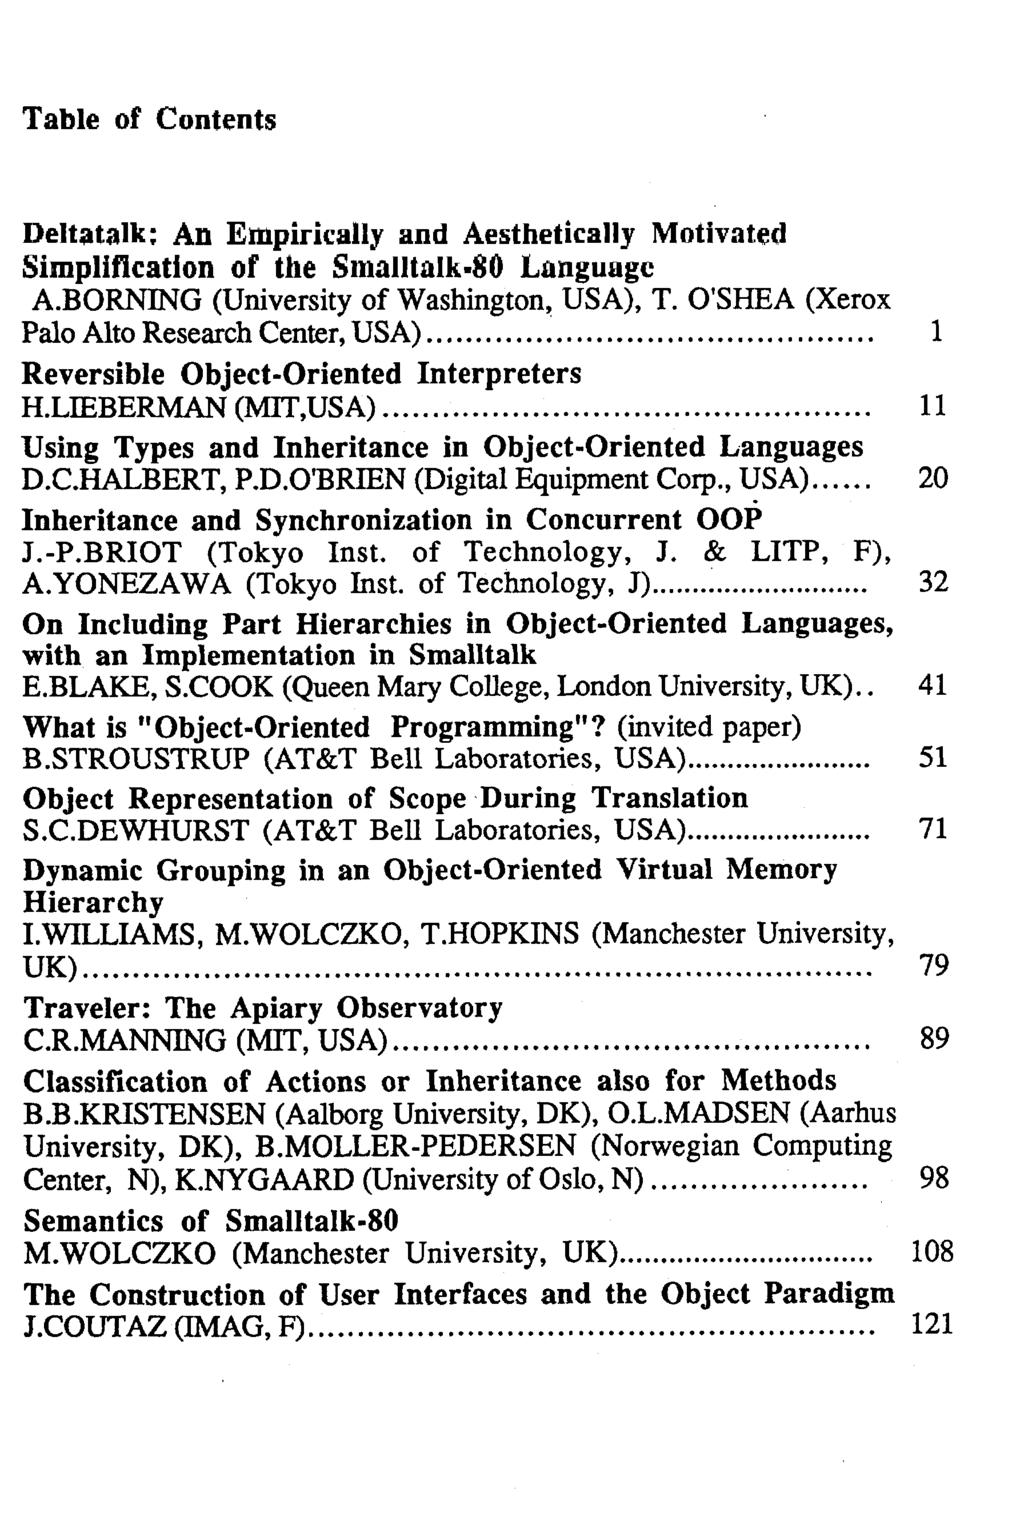 Table of Contents Deltatalk: An Empirically and Aesthetically Motivated Simpliflcat~onof the Smalltnlk-80 hnguagc A.BOR"G (University of Washington, USA), T.